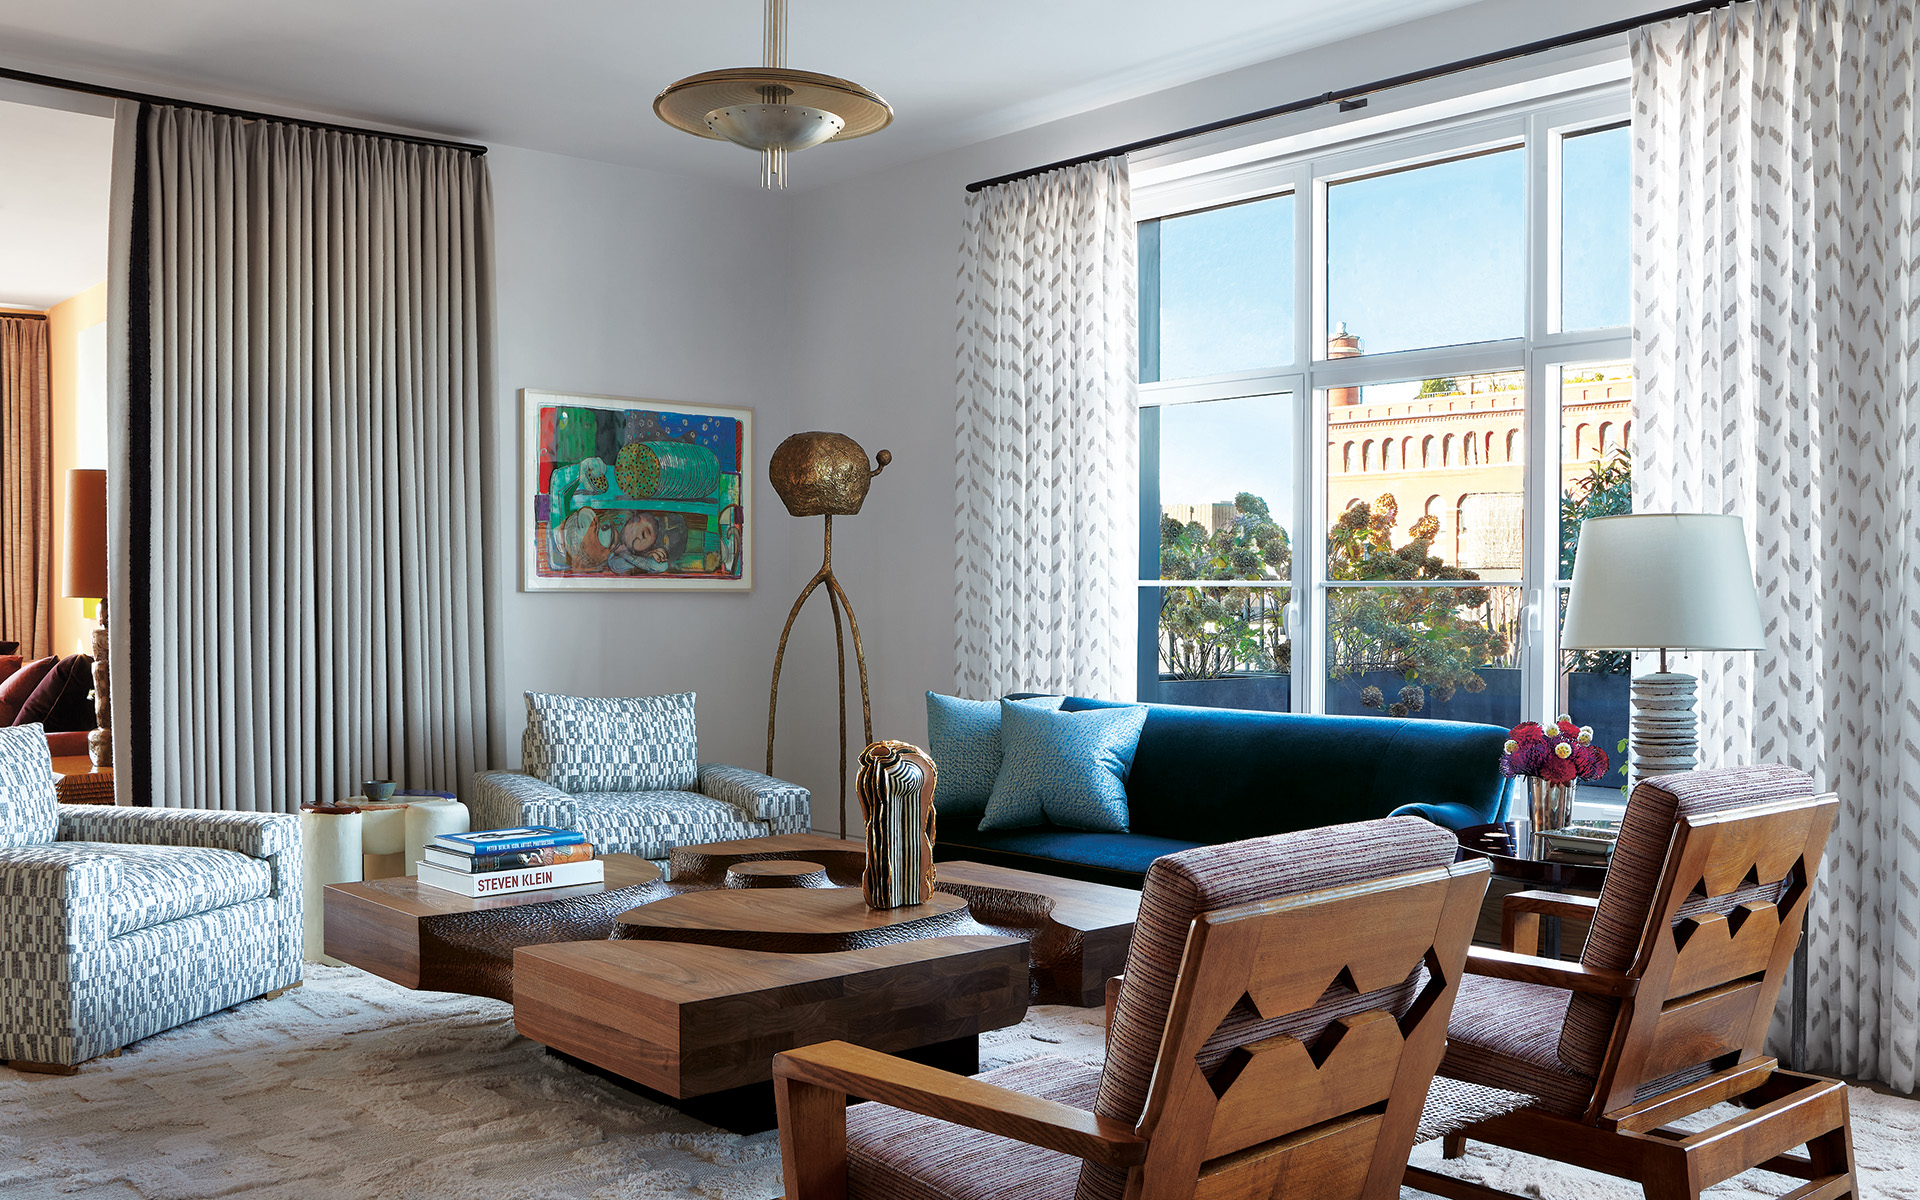 How This Art-Filled Manhattan Penthouse Pushes the Creative Envelope ...